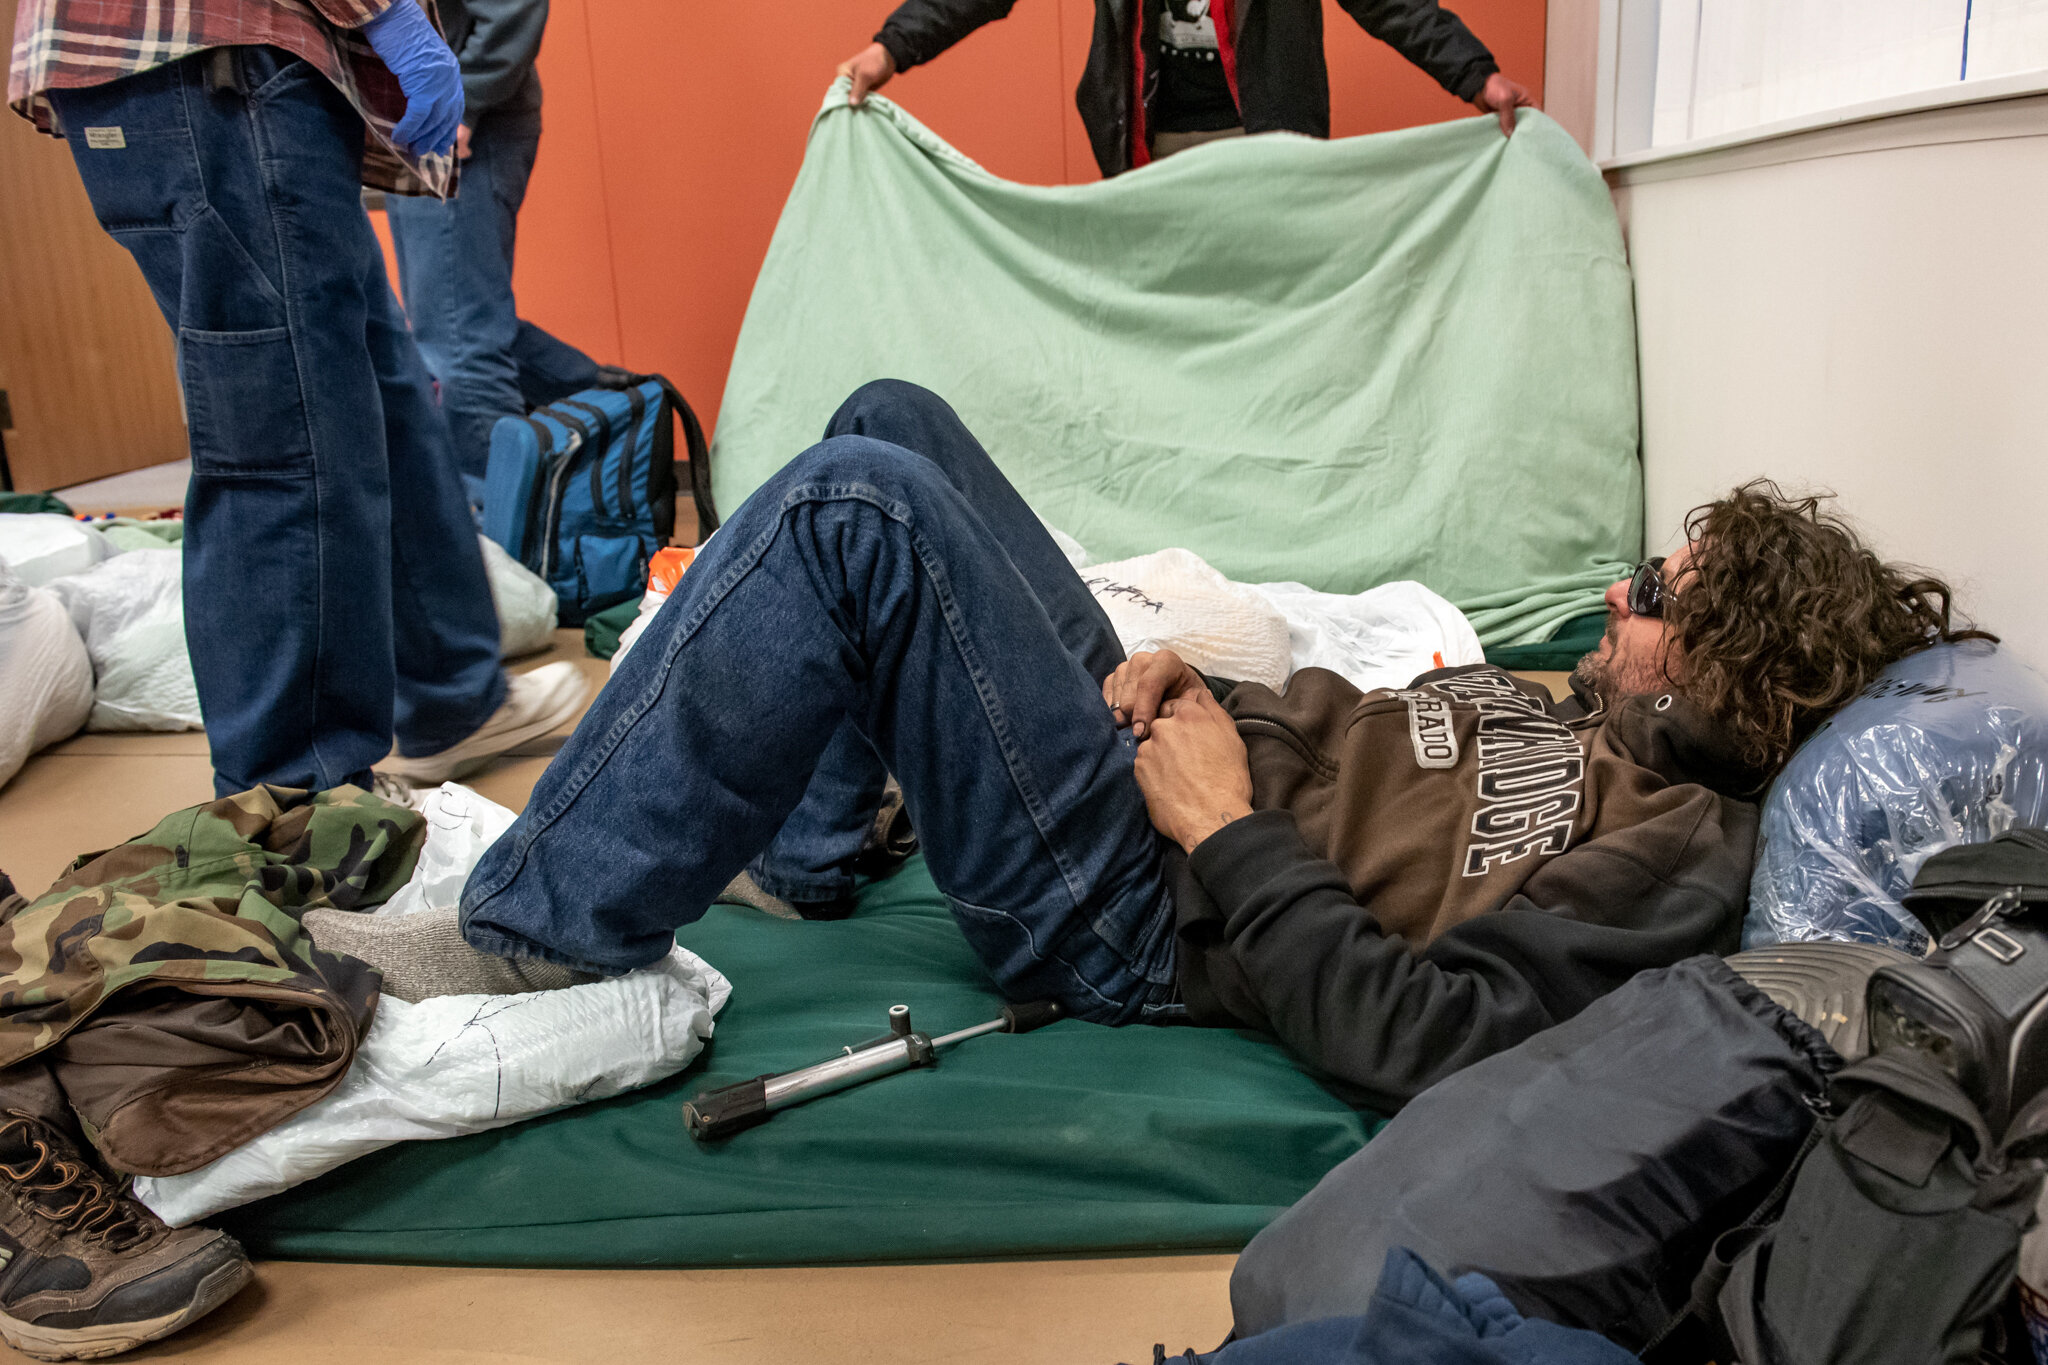  Russell Wilson relaxes on a sleeping mat at The Journey on Tuesday, February 25, 2020.  The Journey is one of two Longmont churches that provide overnight shelter for people experiencing homelessness, or HOPE. (Valerie Mosley/Special to the Colorado